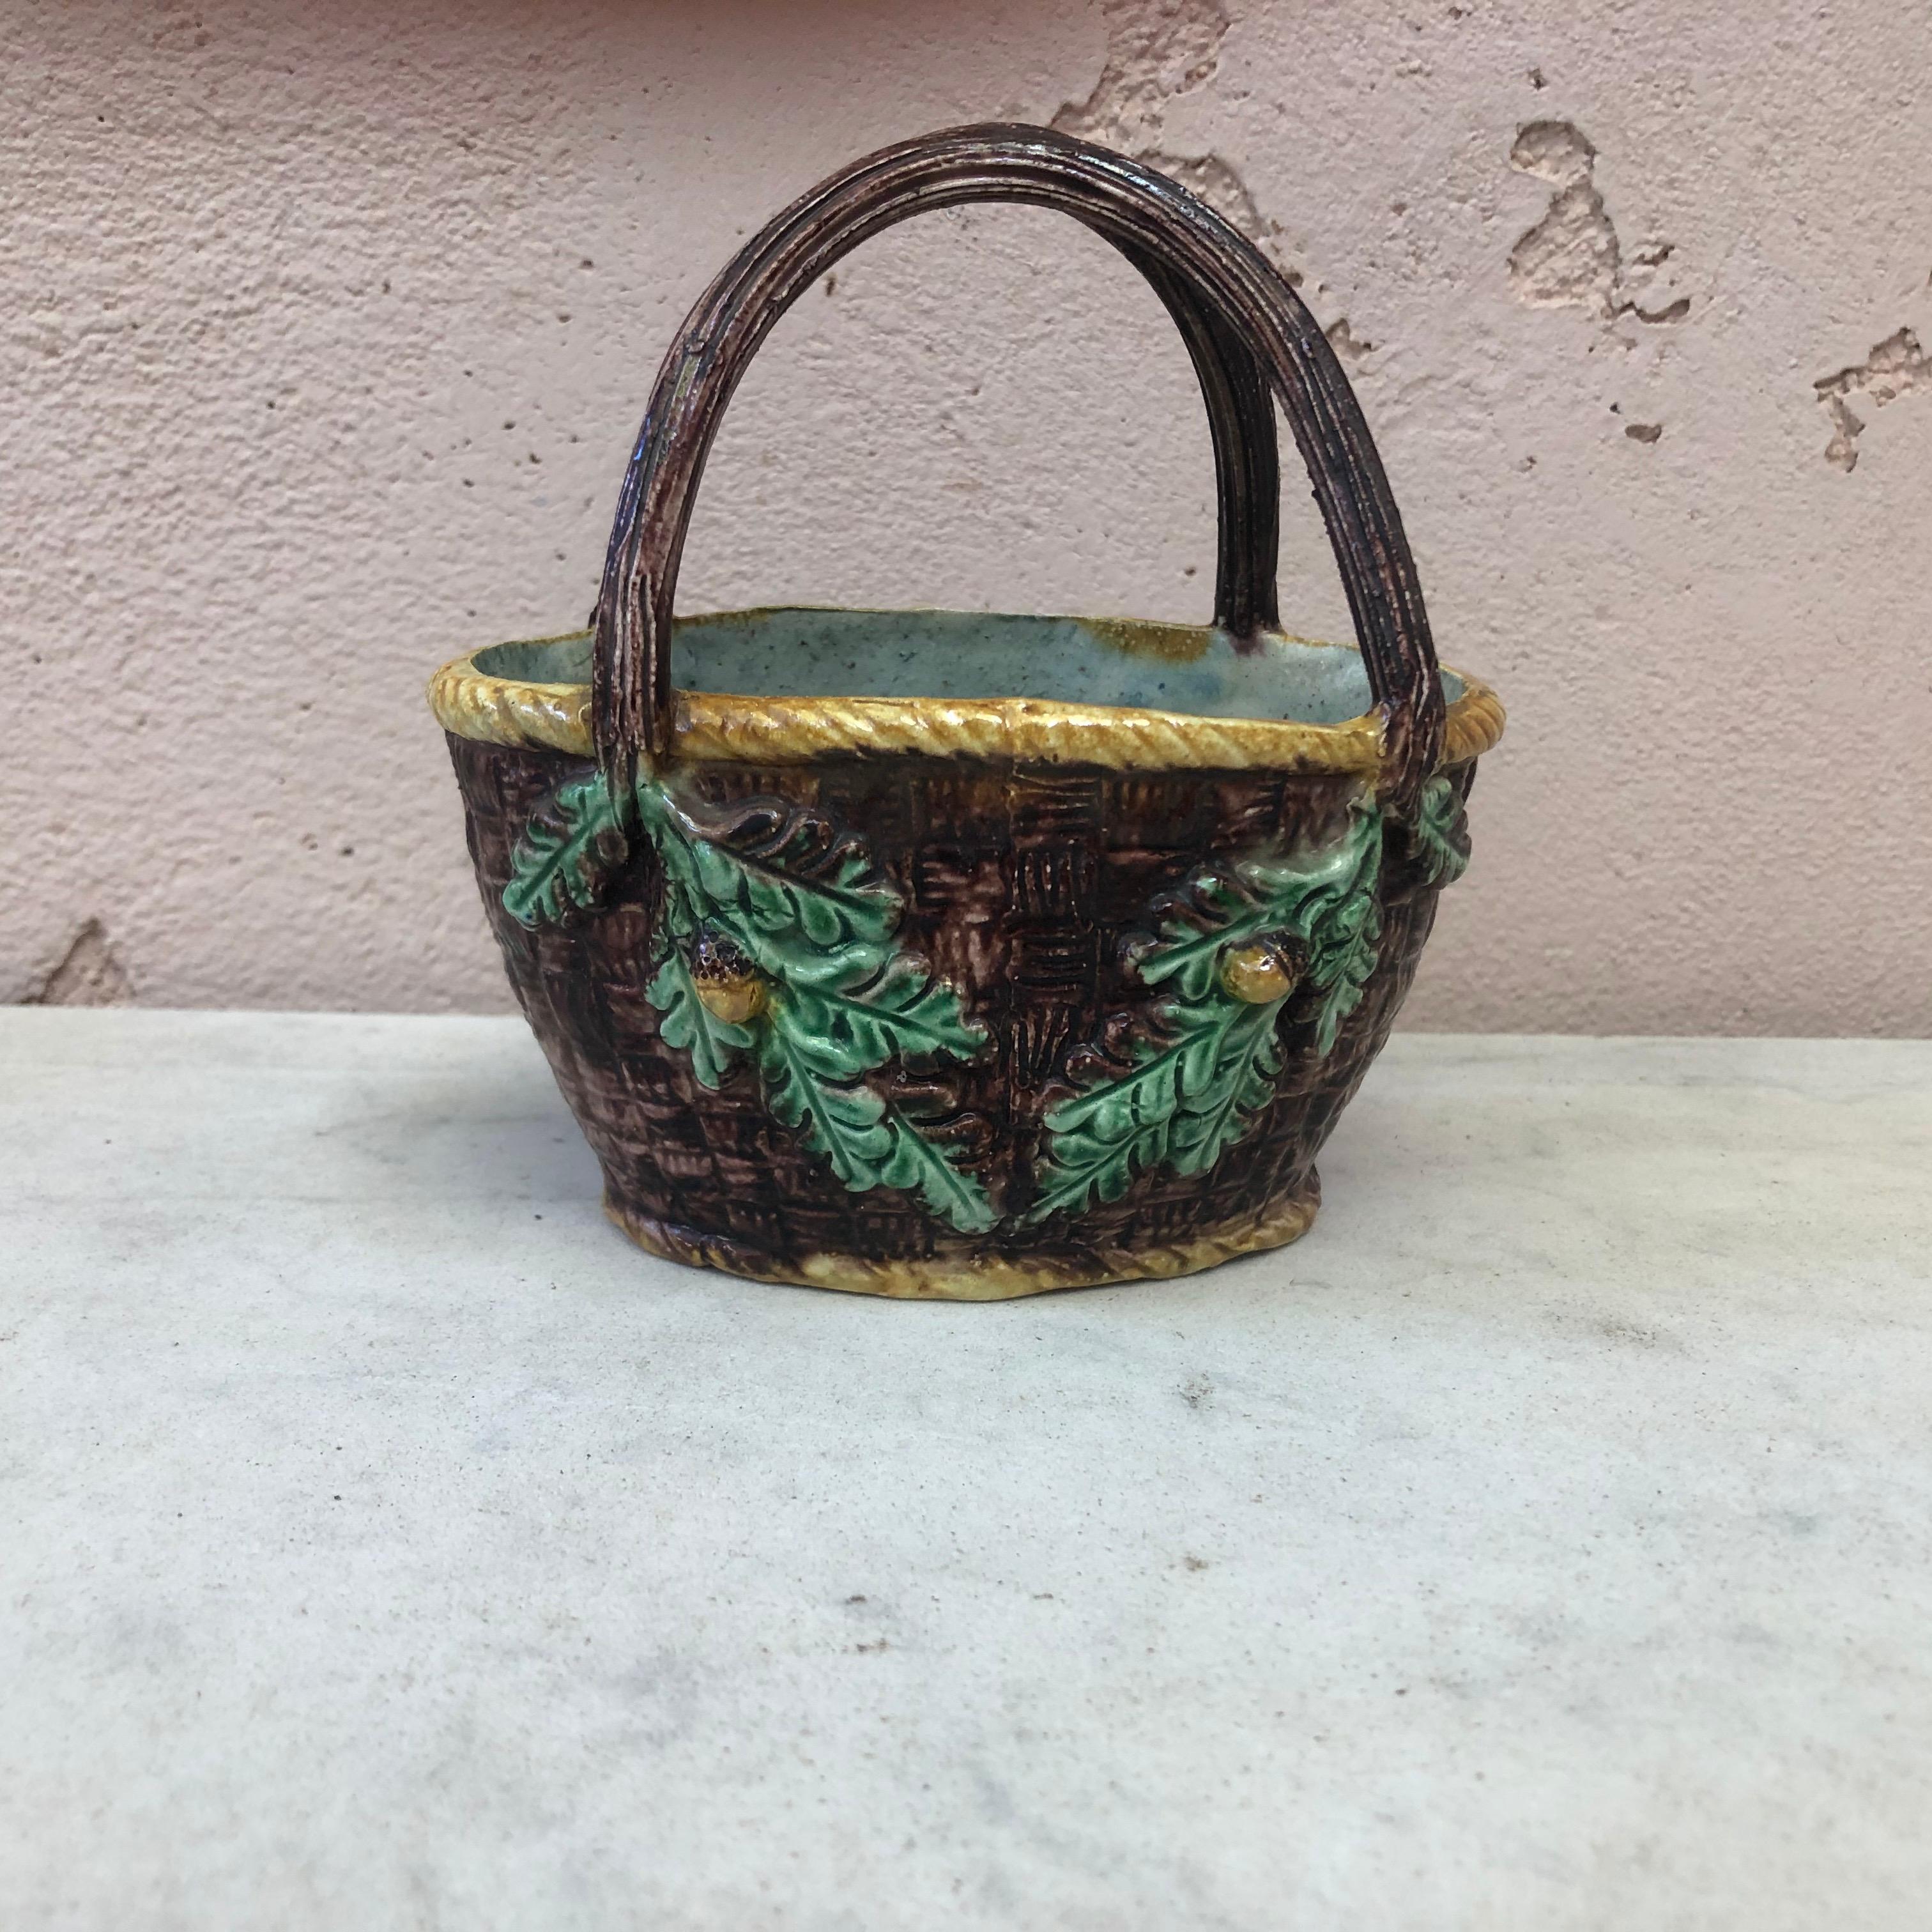 Rare small French Majolica Palissy basket attributed to Thomas Sergent, circa 1880.